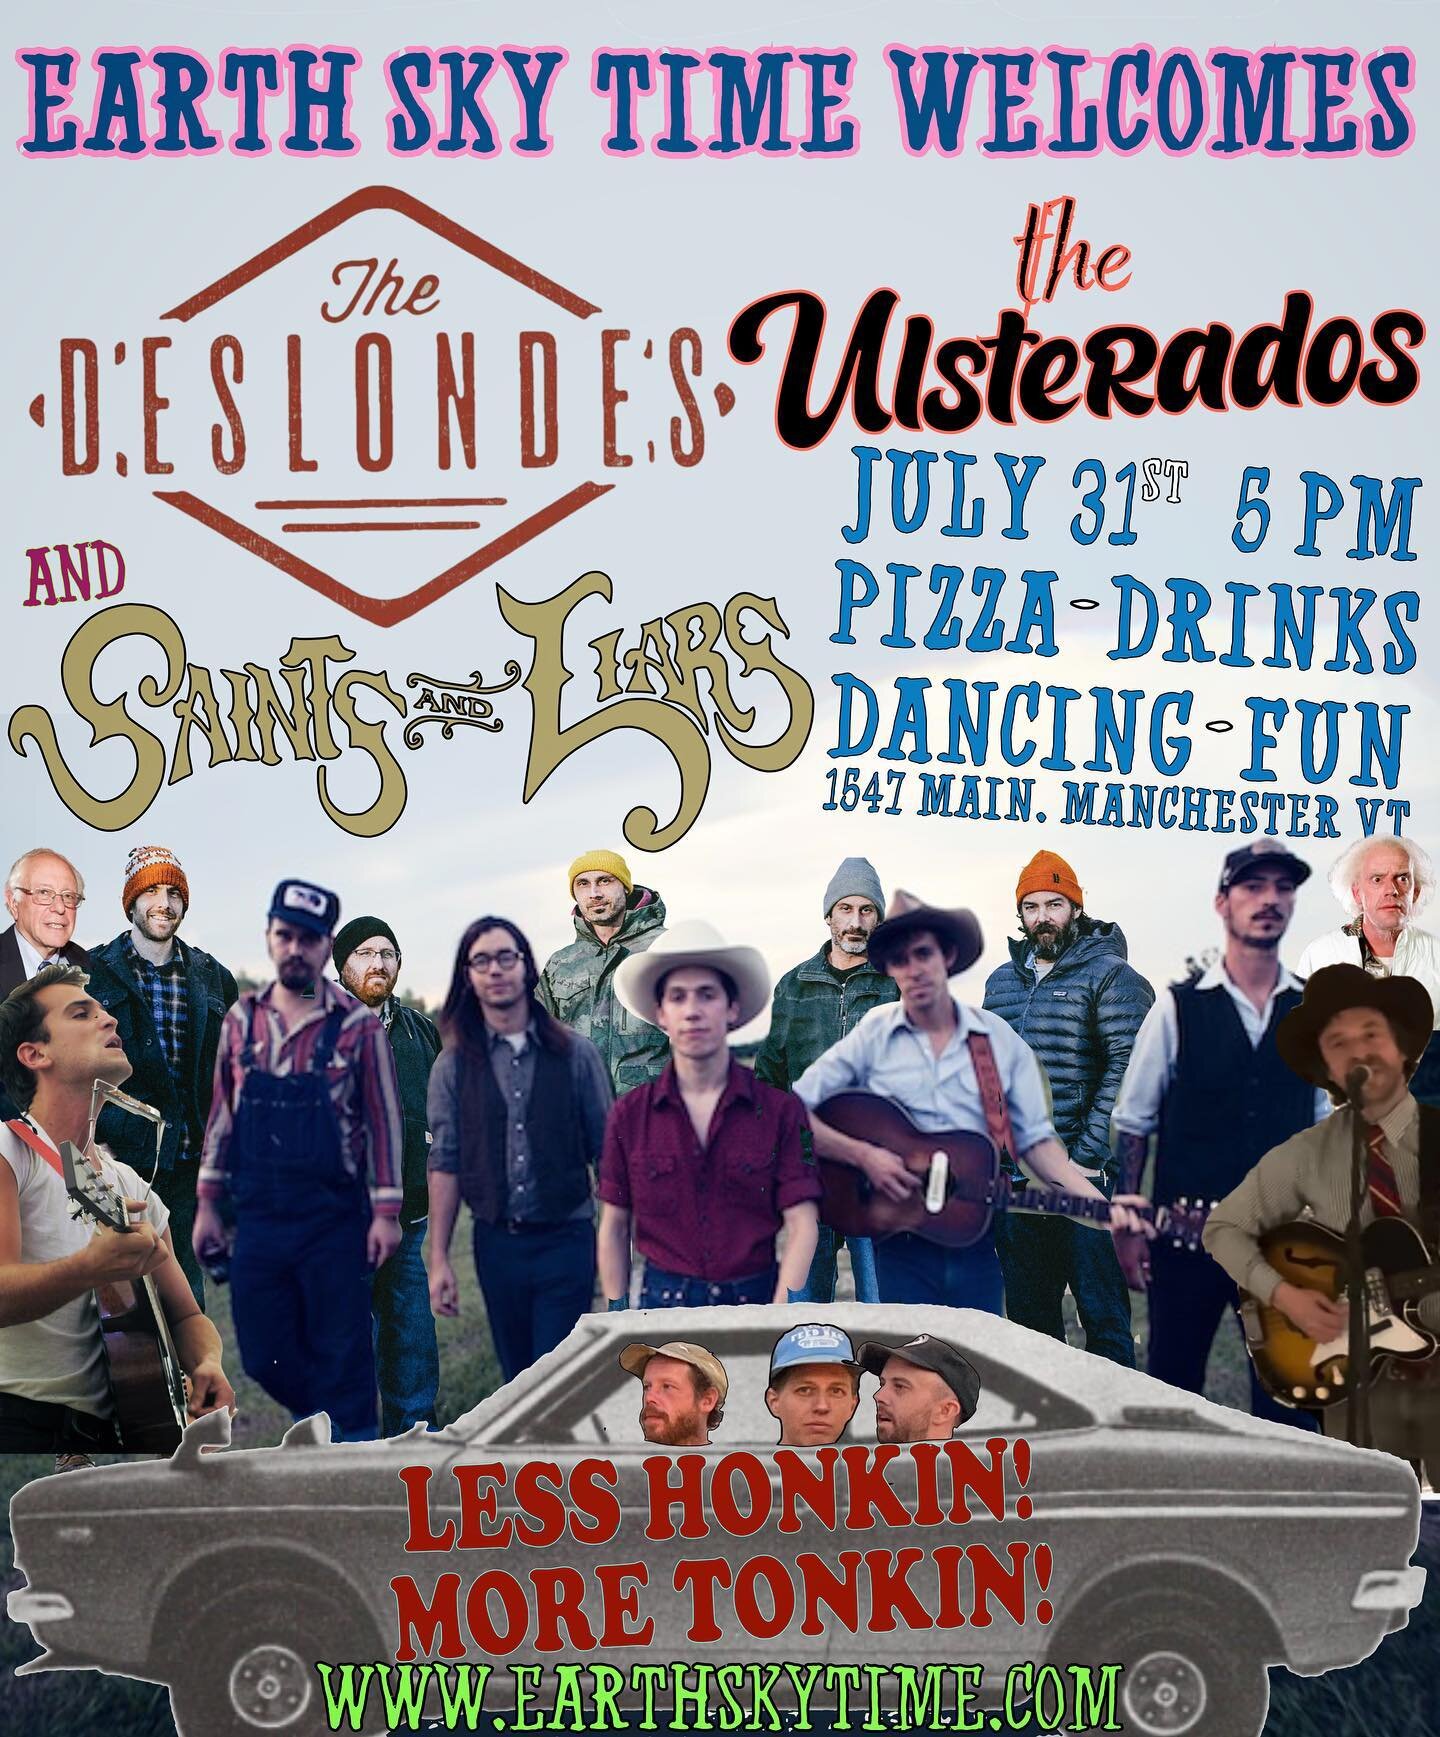 Super special show coming up on 7/31!!
Honky tonk headliners @thedeslondes
Local legends @saintsandliarsmusic 
And the Ulsterados, the all star country western brainchild of members of @spiritfamilyreunion @horseeyedmen and @mailthehorse
Come on time